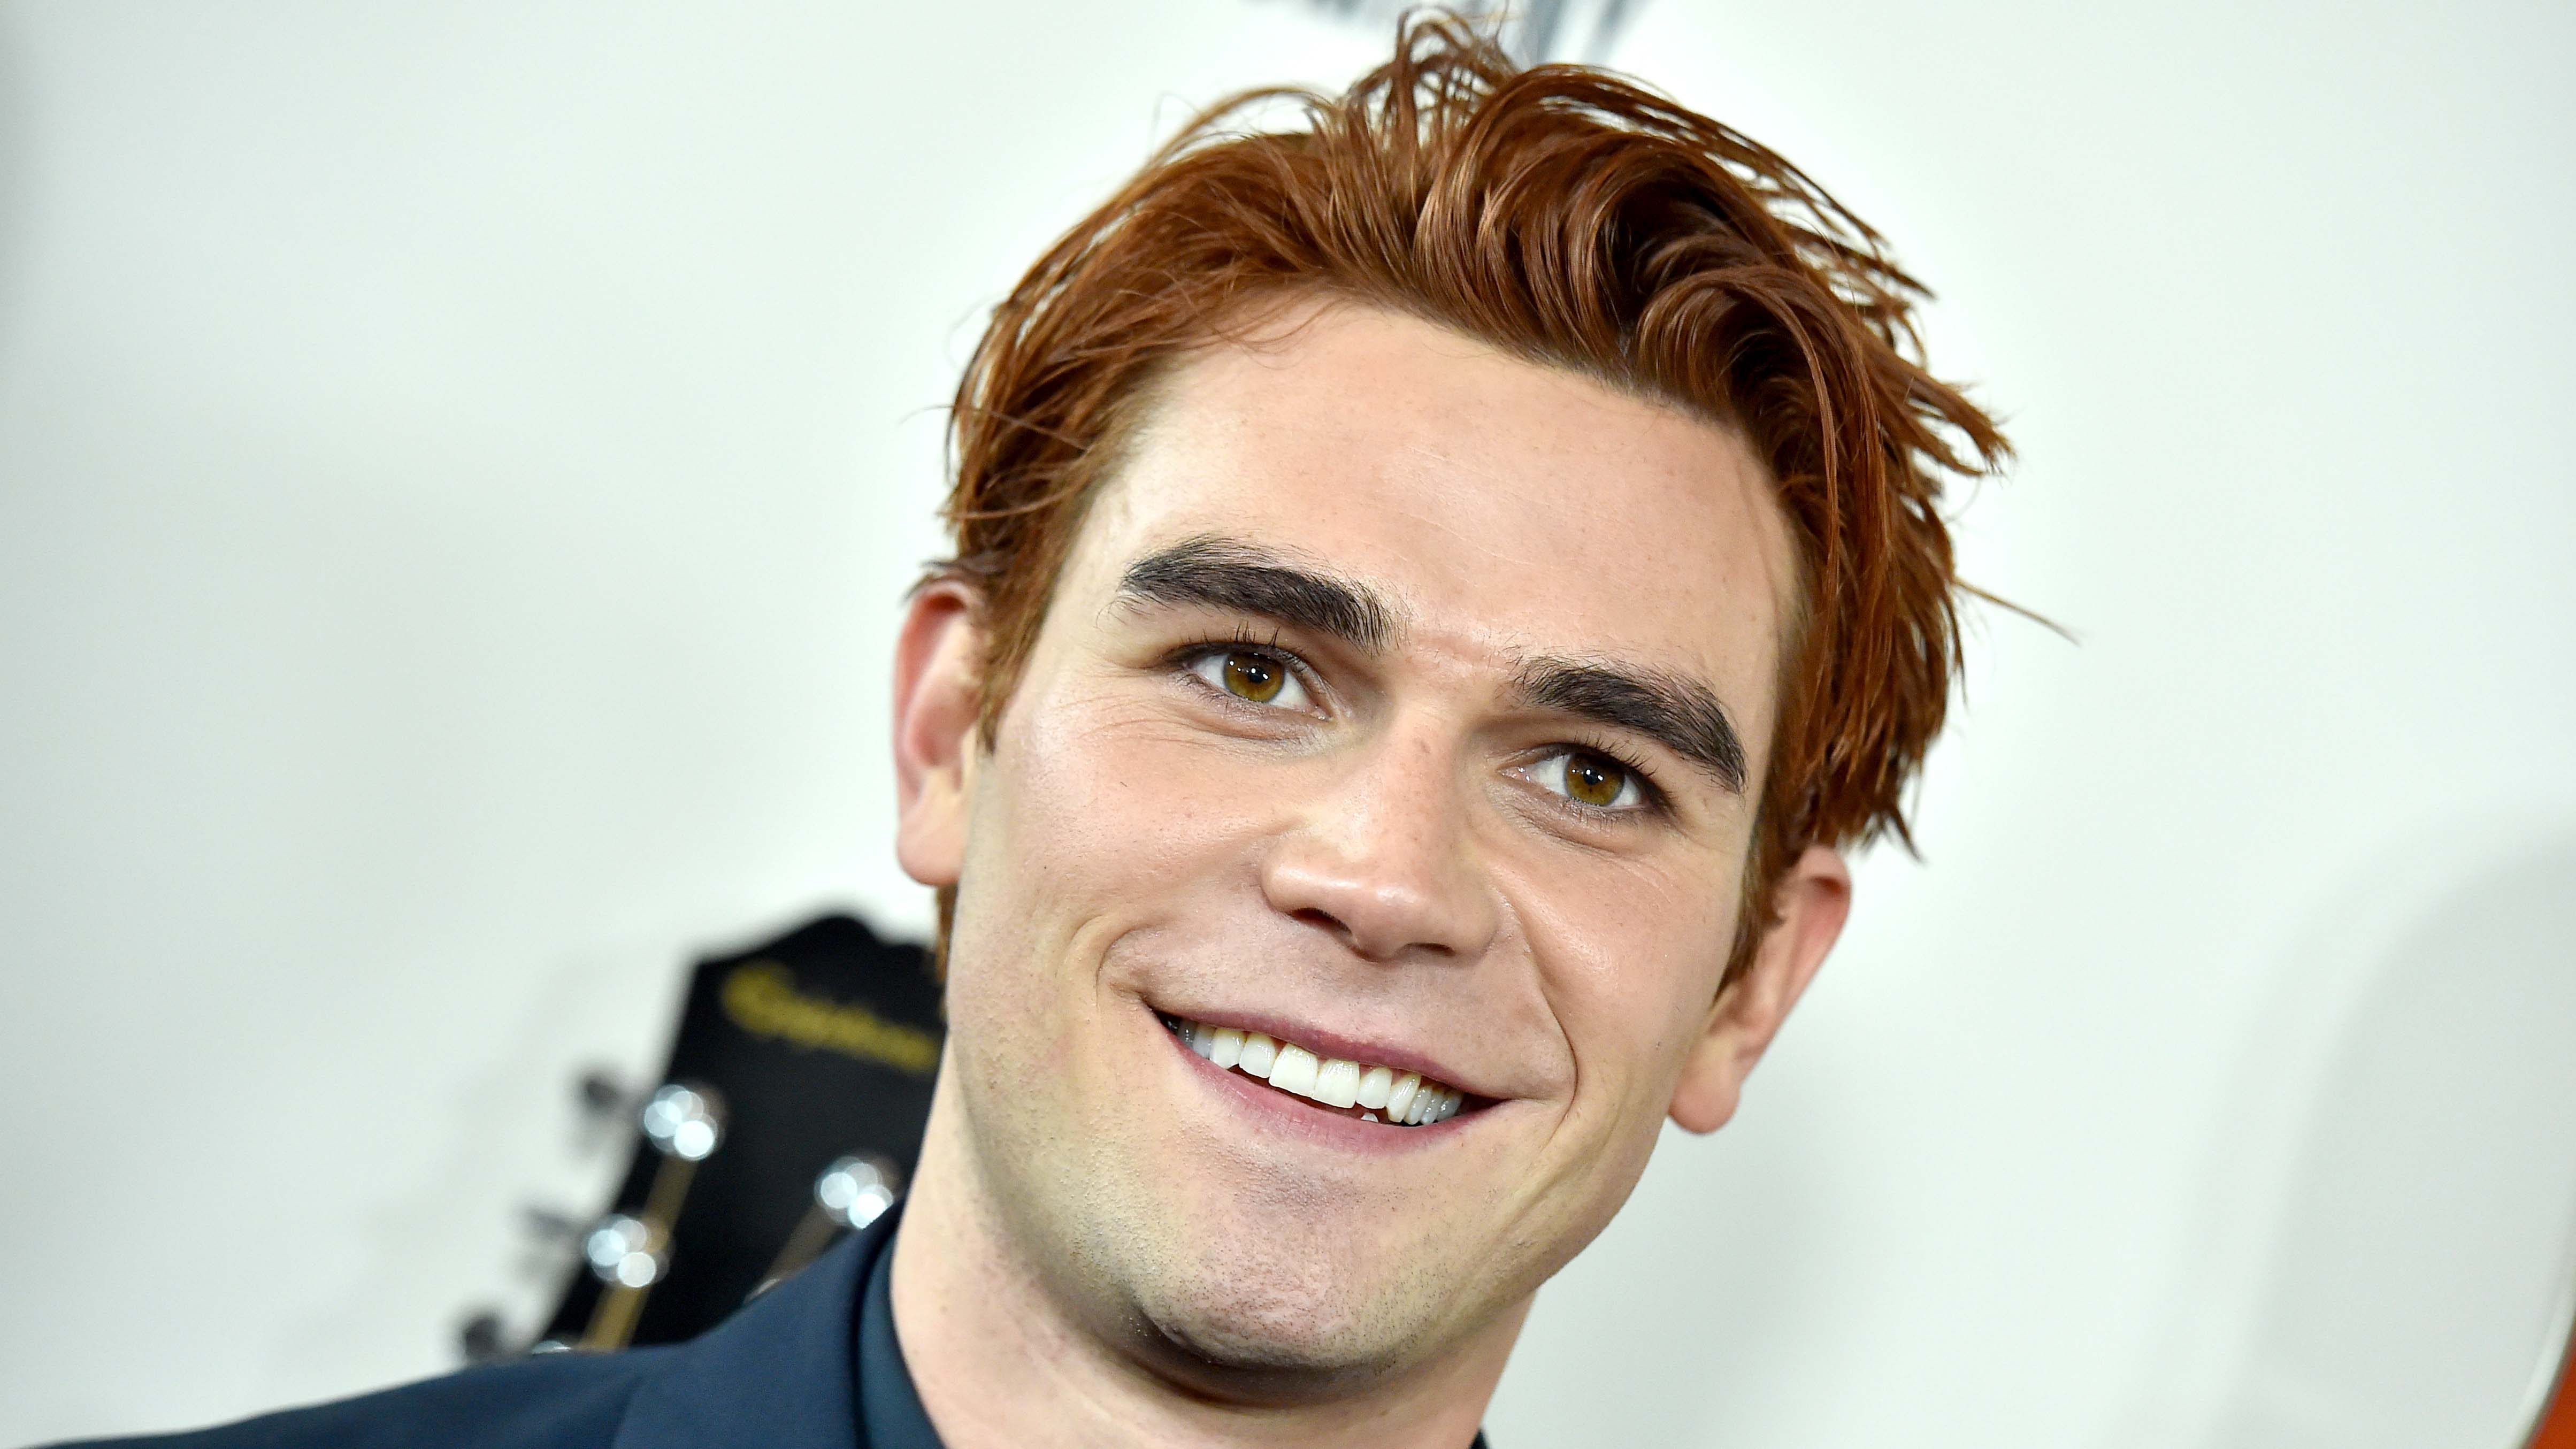 KJ Apa Is Unrecognizable After Ditching His Red Hair for a Buzz Cut. 